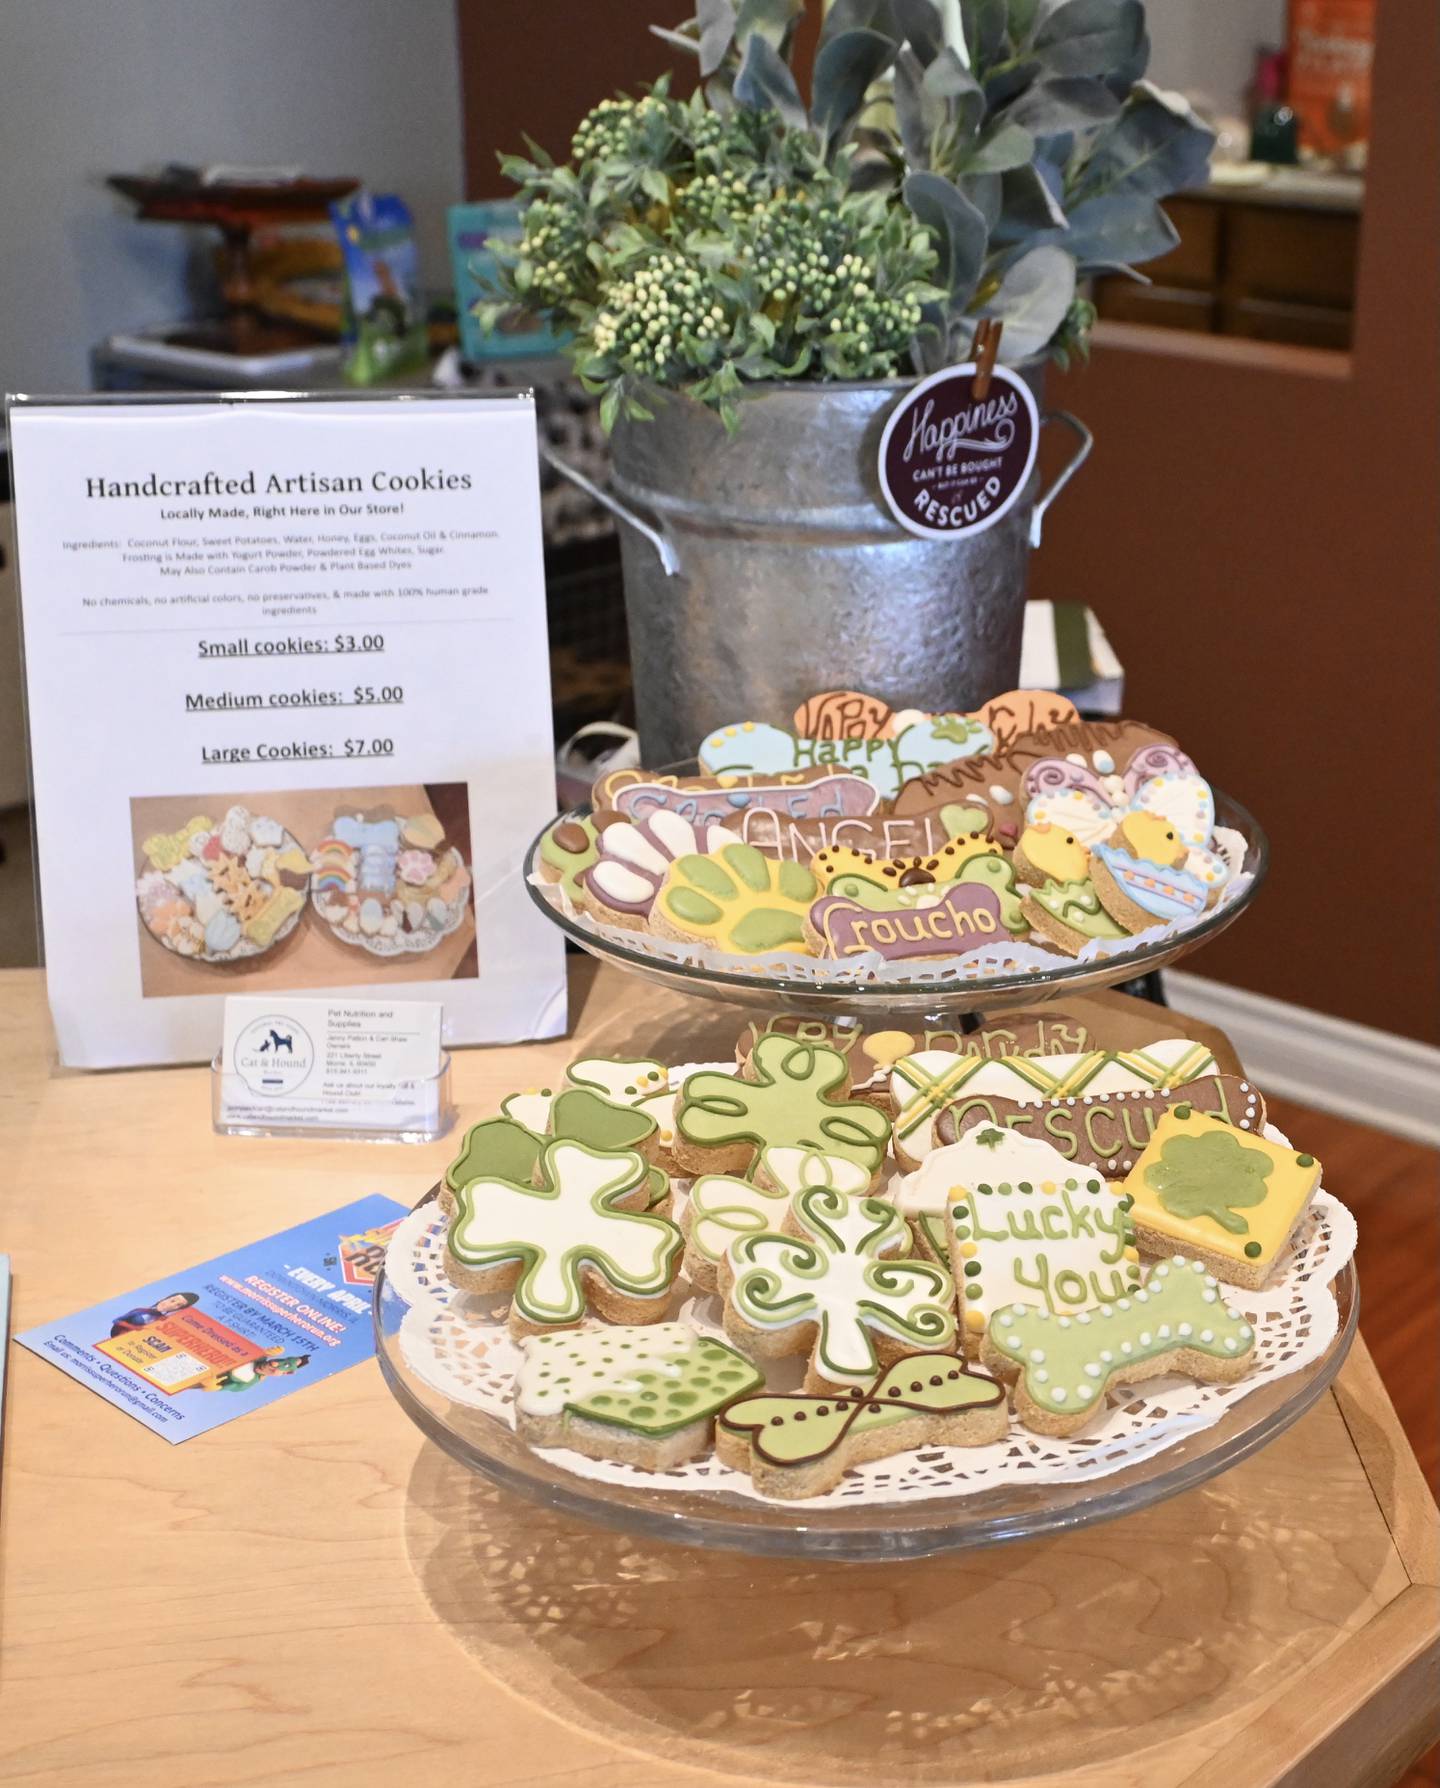 The market also sells handcrafted artisan cookies and frozen cupcakes baked in-house by Karen Johnson. They are made with coconut flour, sweet potatoes, coconut oil, honey, eggs, and cinnamon.